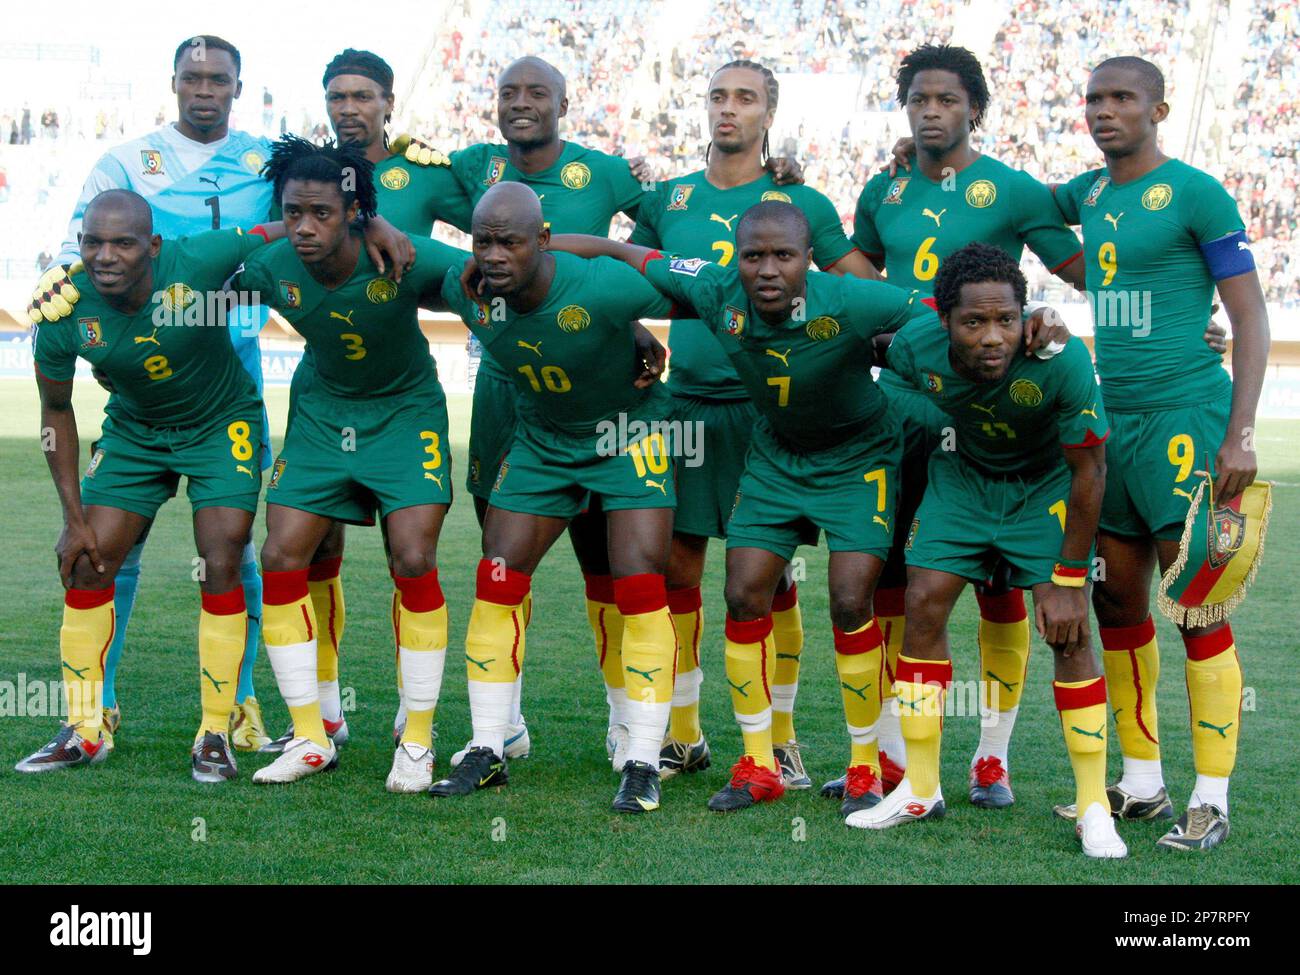 Cameroons team poses before the game against Morocco before their World Cup qualifying second leg soccer match in Fez, Morocco, Saturday Nov.14, 2009